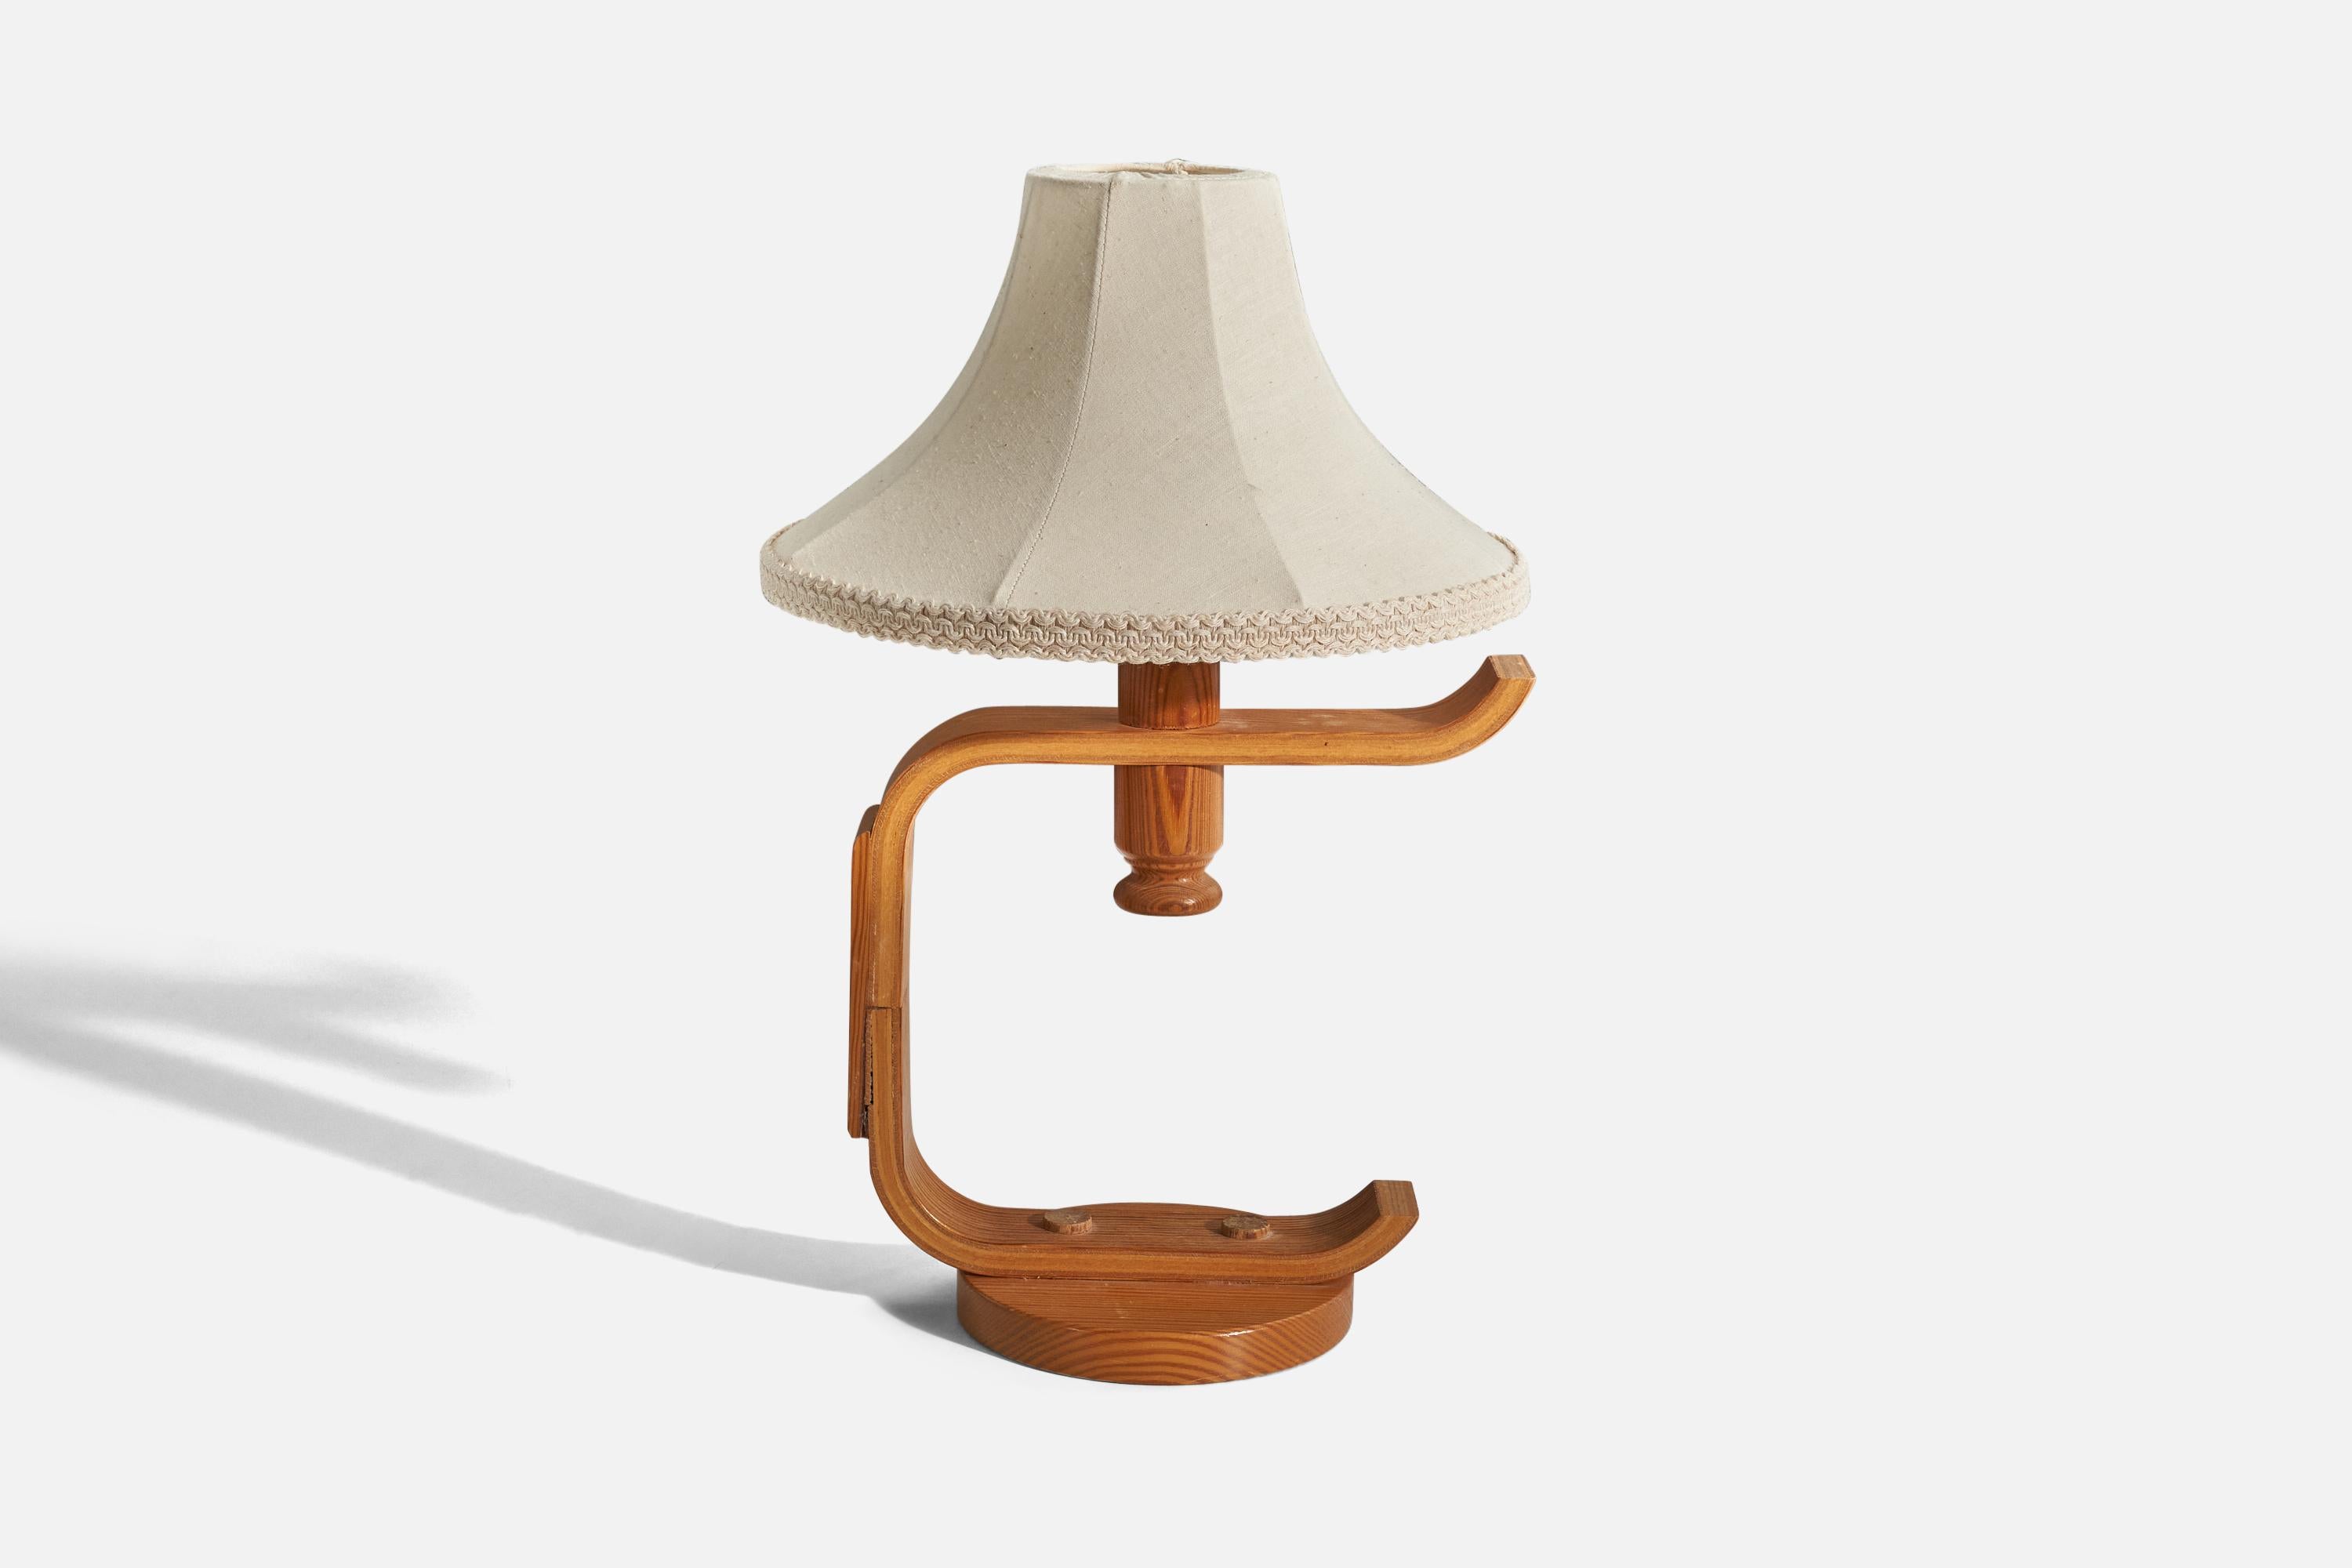 A pine table lamp designed and produced in Sweden, c. 1970s.

Sold with fabric lampshade. 
Dimensions stated refer to the table lamp with the lampshade.